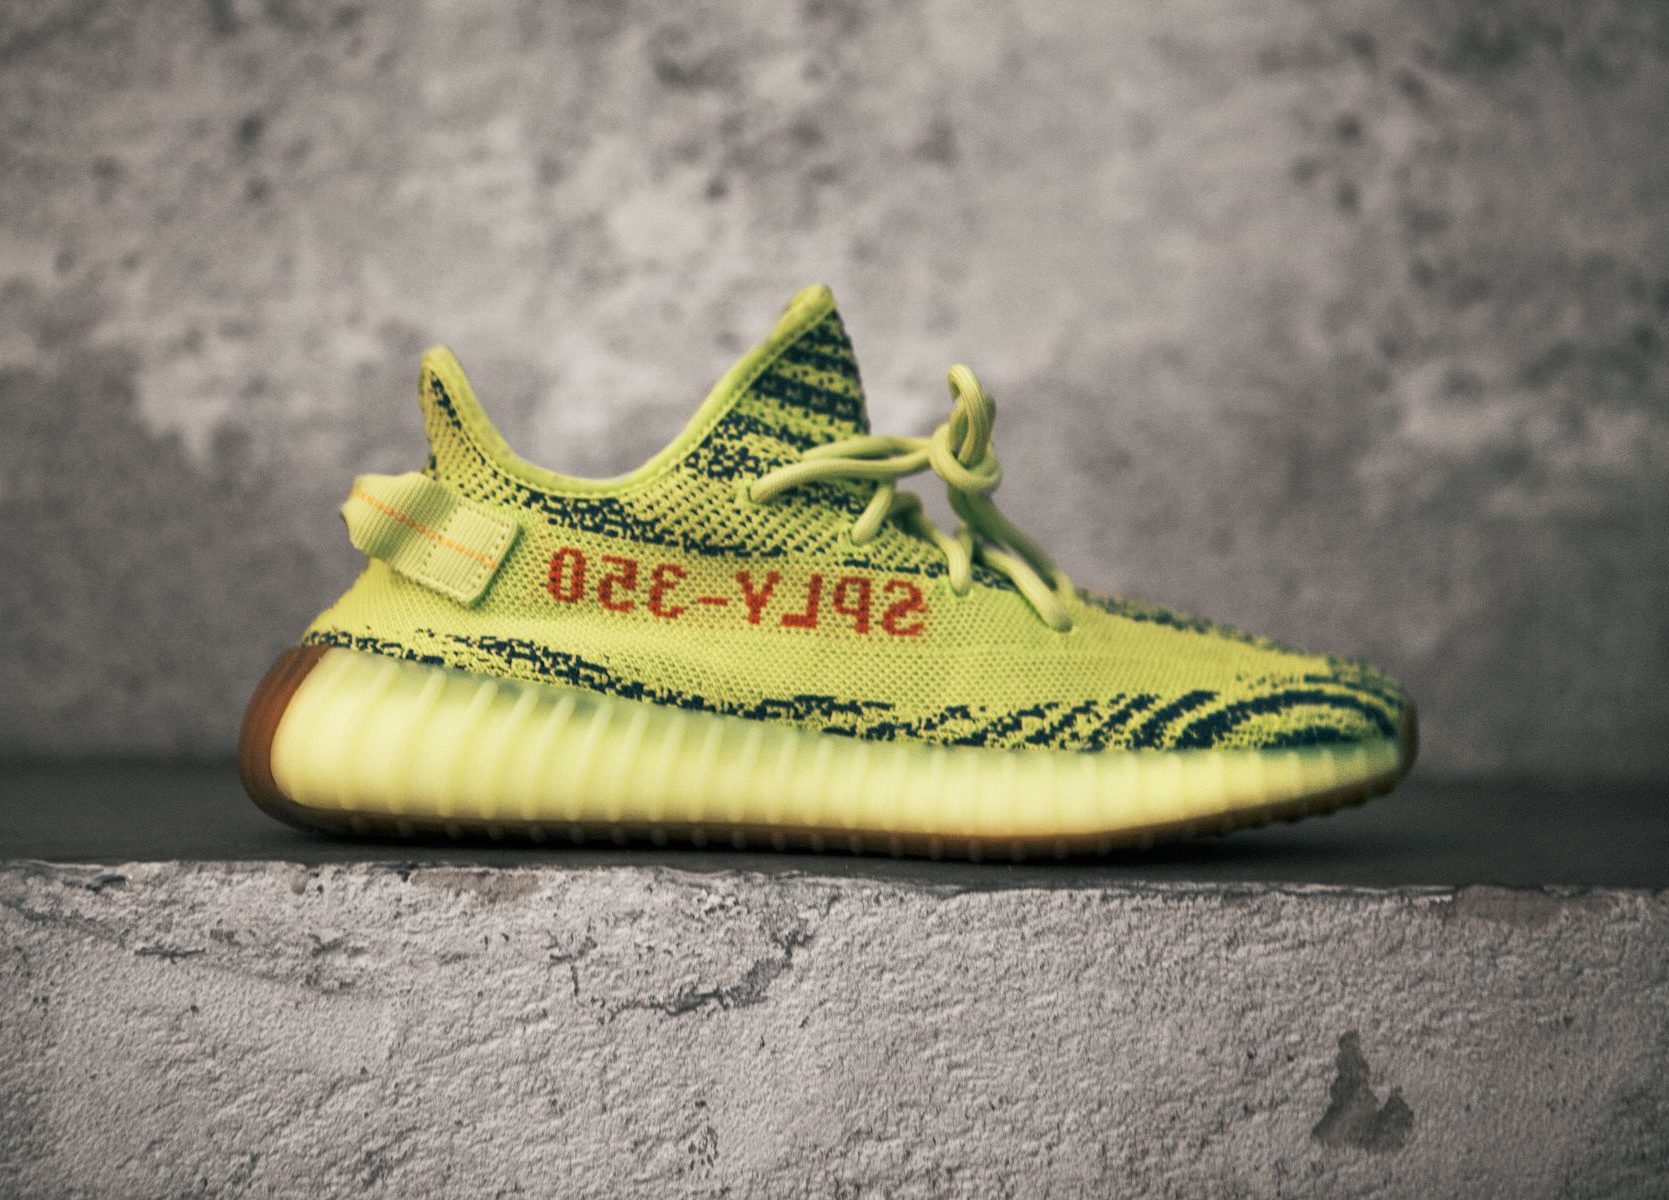 How Does The adidas Yeezy Boost 350 V2 